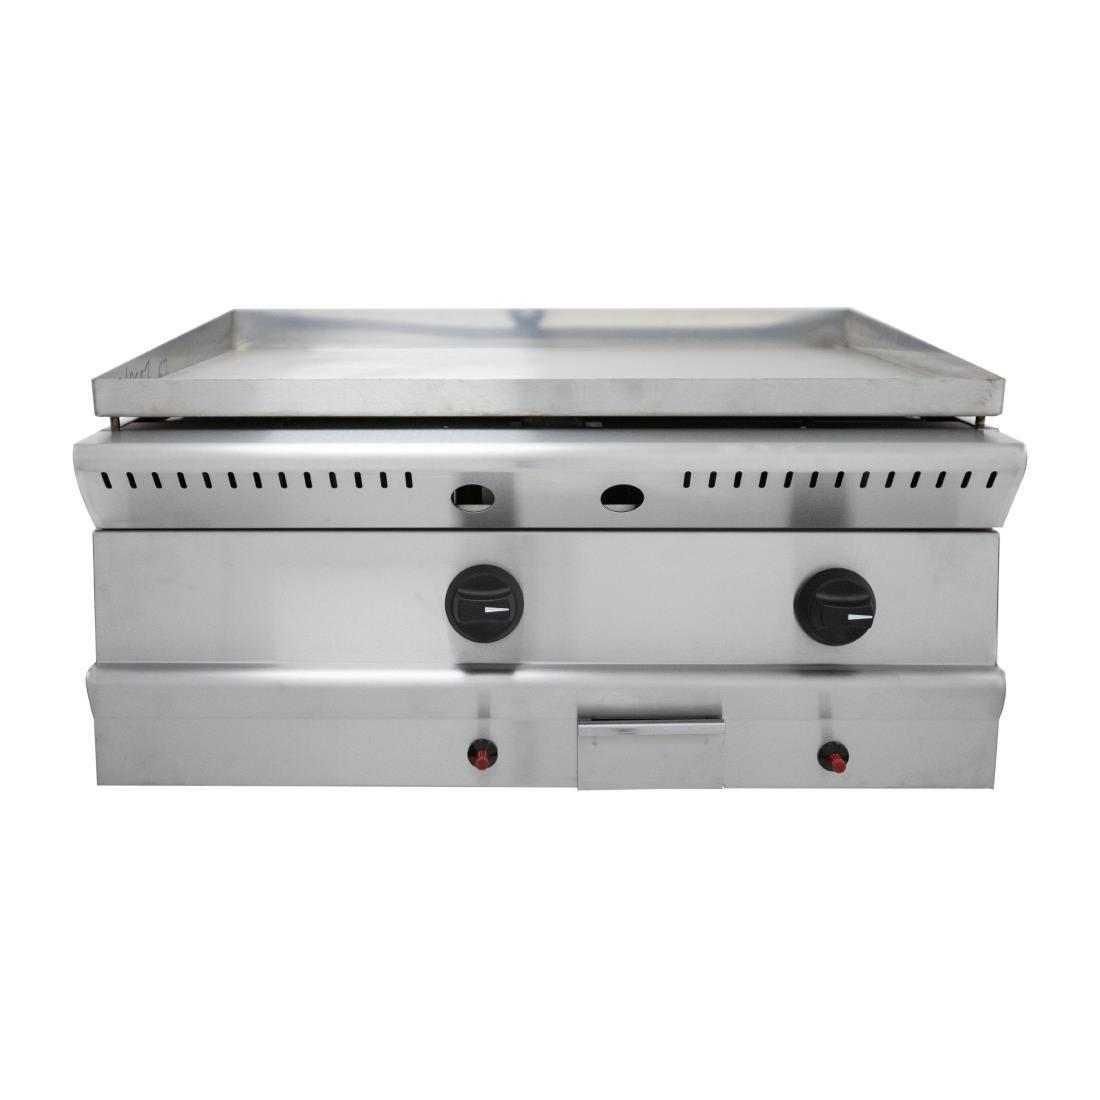 Parry Double Natural Gas Griddle PGG7 - GM799-N  - 1